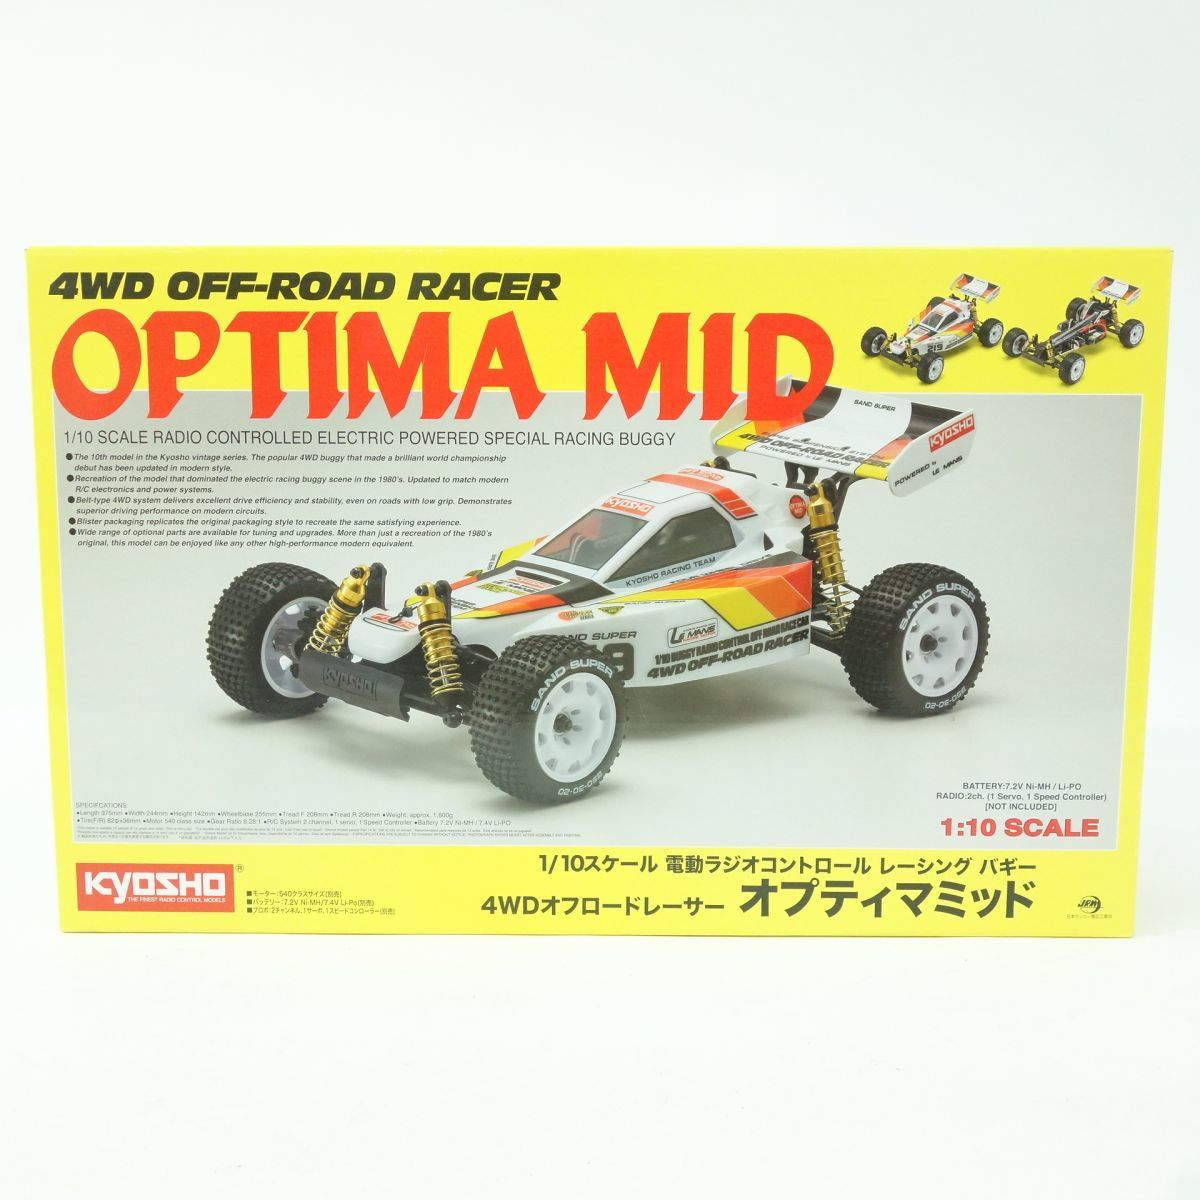 074S [Неокрытый] Kyosho 1/10 Scale Electric RC EP 4WD Racing Buggy Off -Racer Optimid № 30622